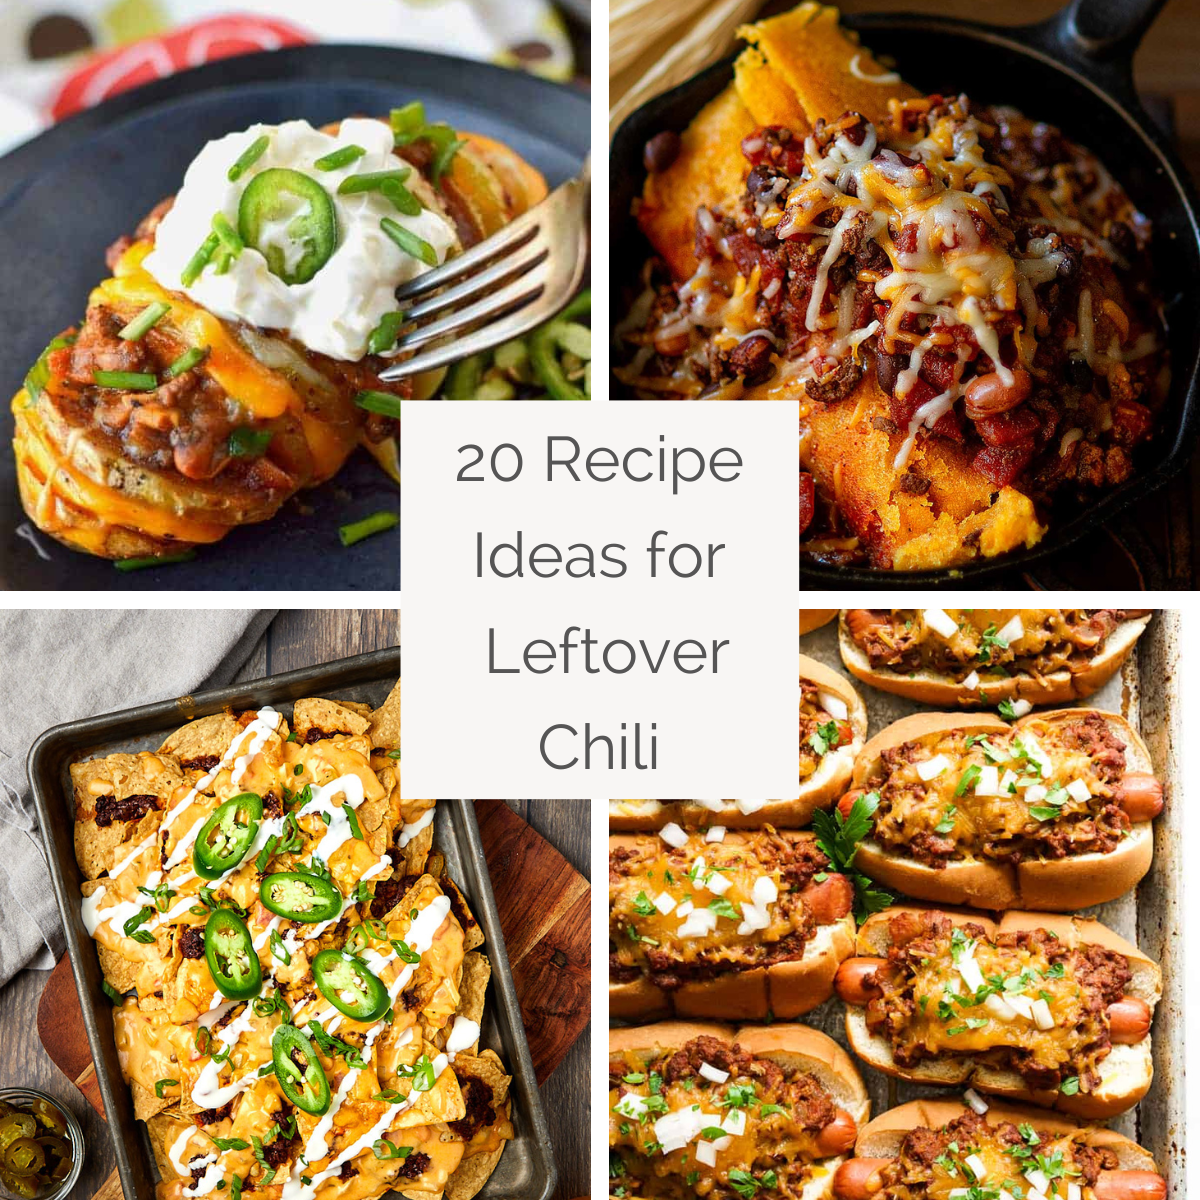 4 different recipes featuring leftover chili.